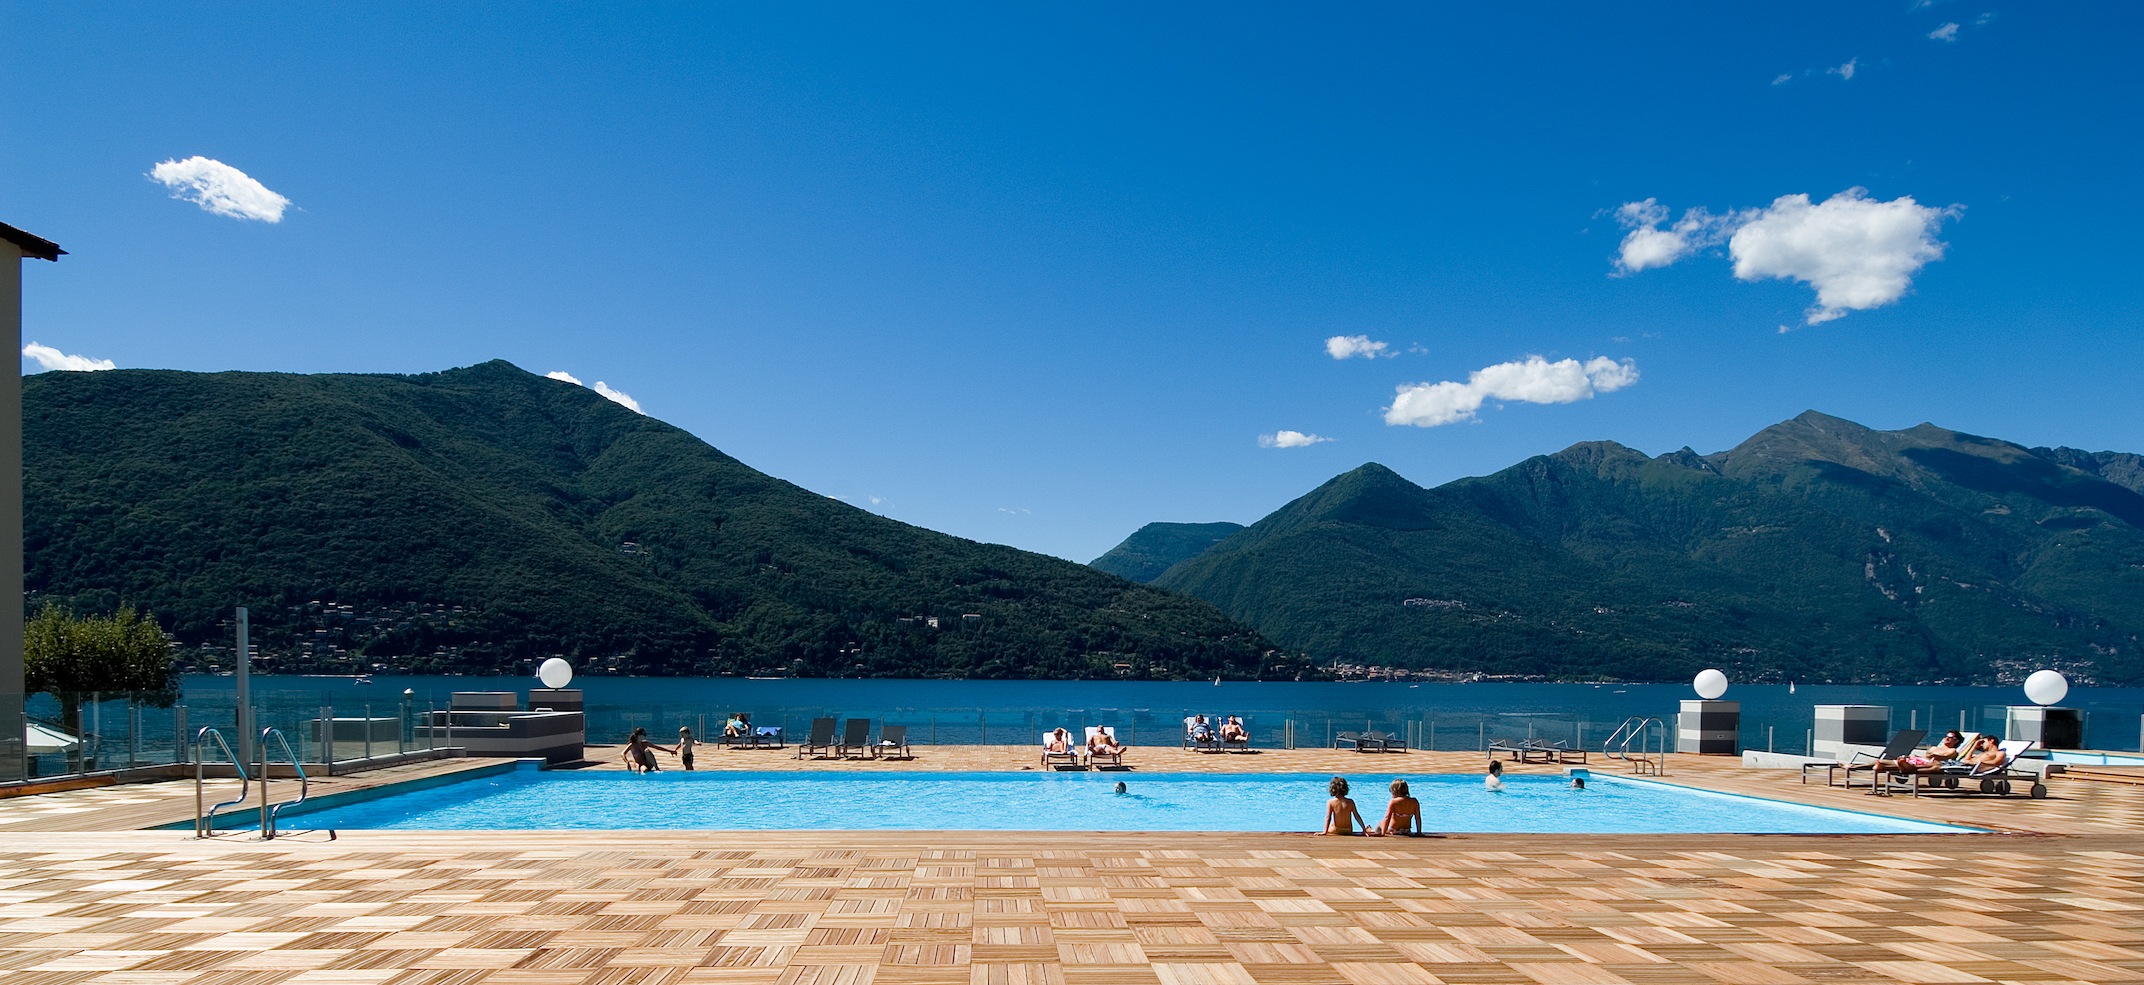 https://www.in-lombardia.it/sites/default/files/accomodation/images/105448/32225/swimming_pool_area.jpg